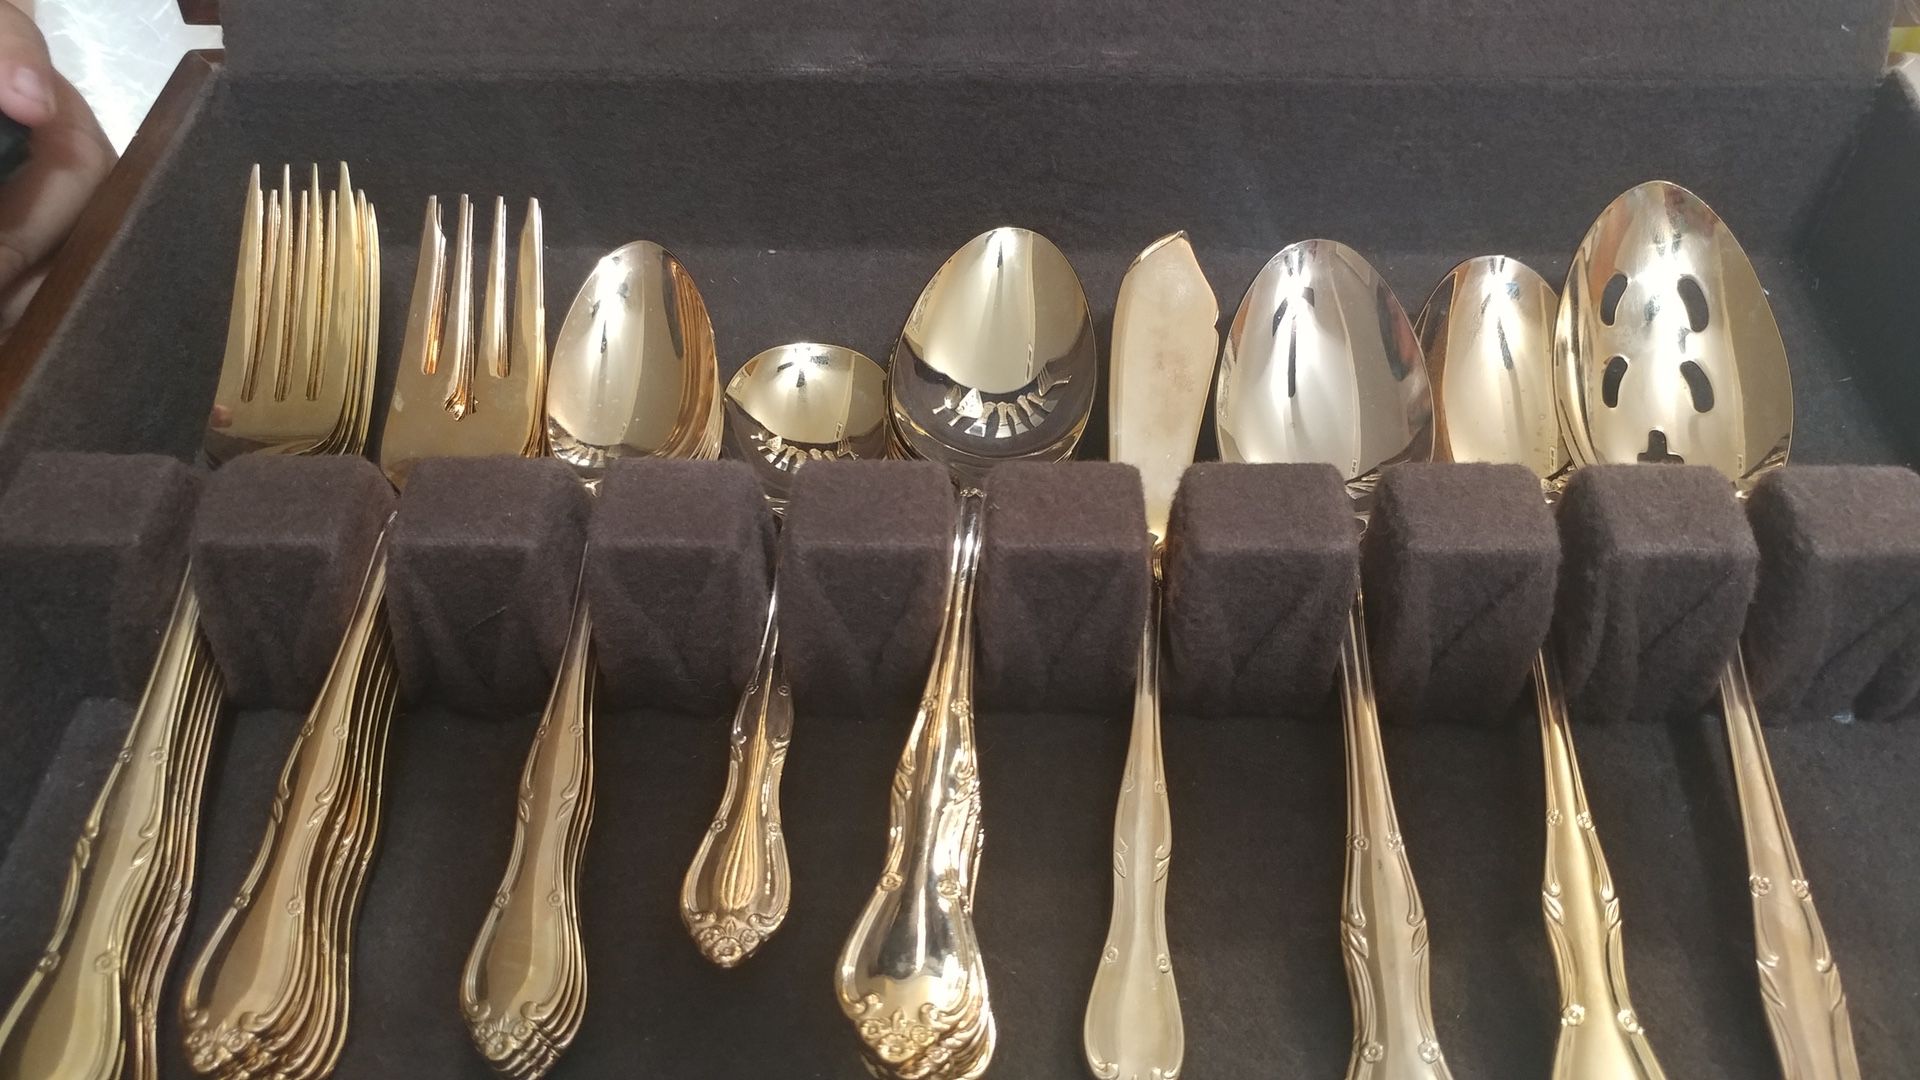 Gold Plated Spoons 